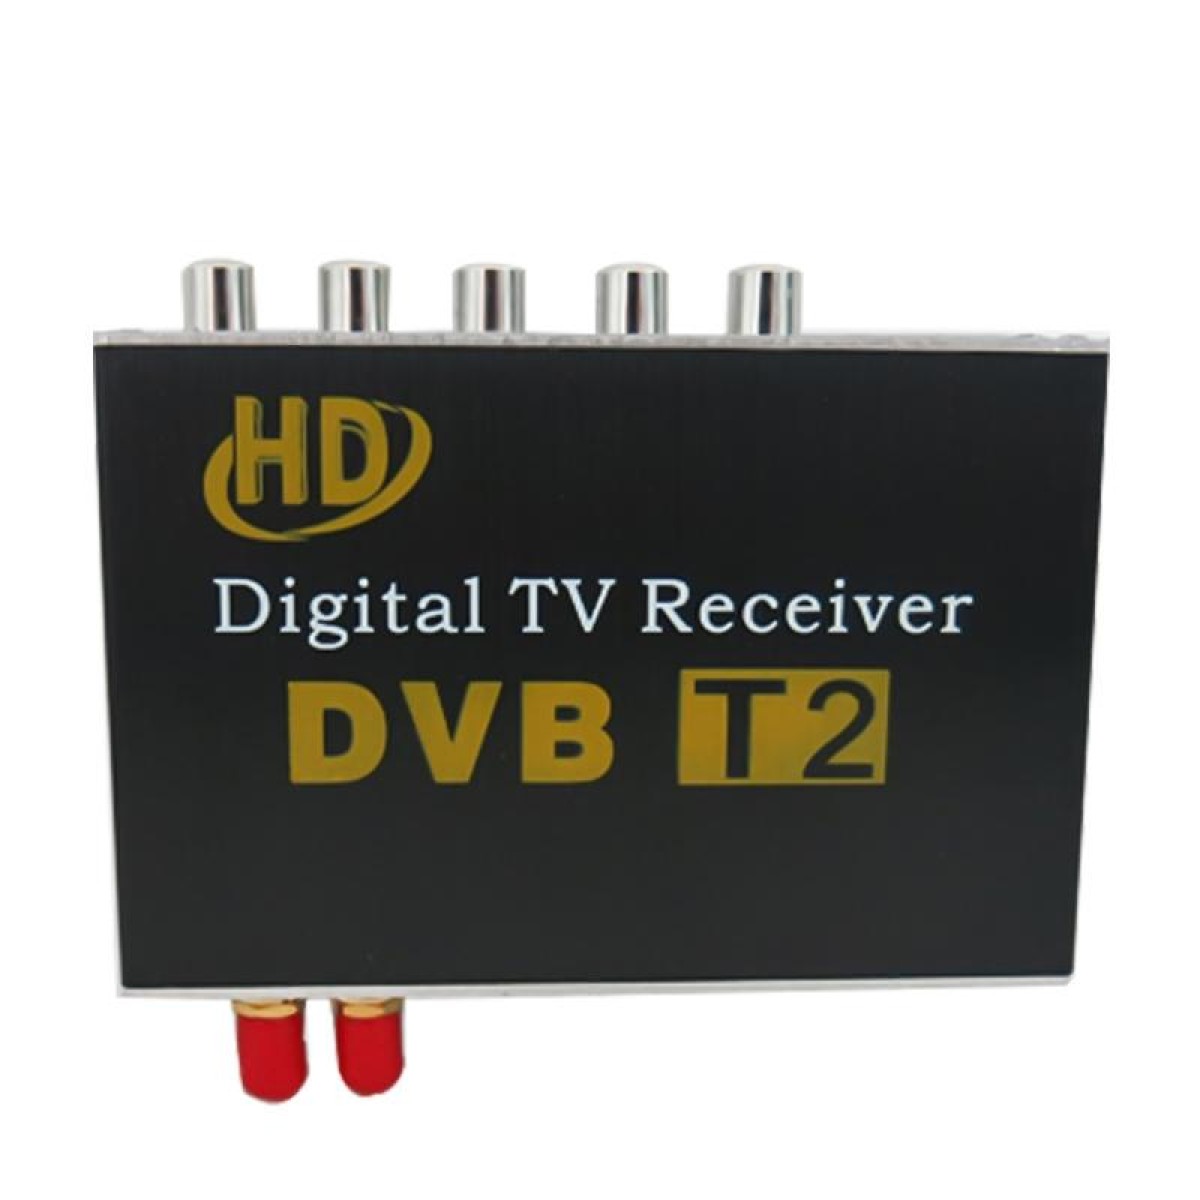 High Speed 90km/h H.264 / AVC MPEG4 Mobile Digital Car DVB-T2 TV Receiver, Suit for Europe / Singapore / Thailand / Africa ect. Market(Black)